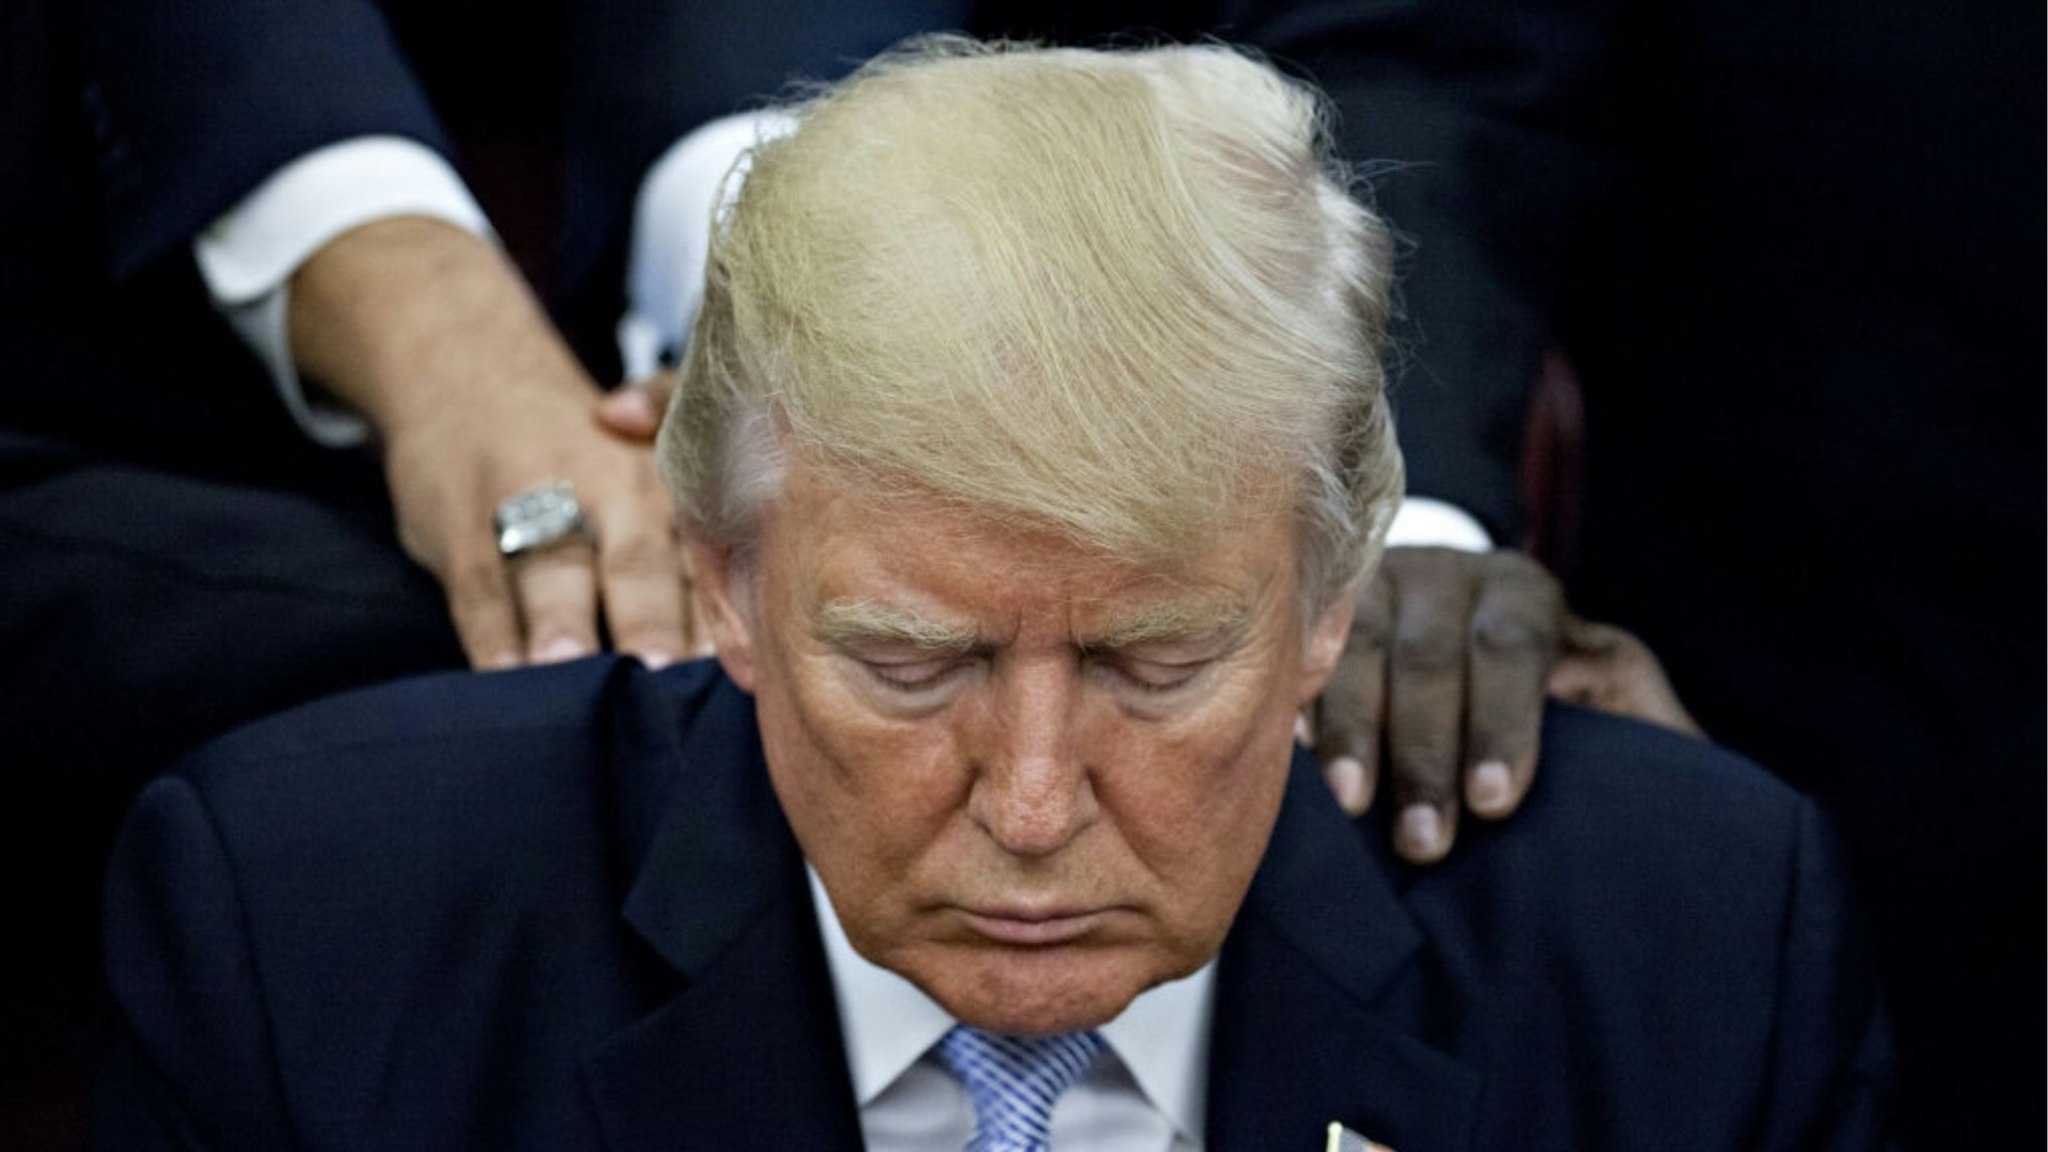 U.S. President Trump bows his head during a prayer while surrounded by faith leaders and evangelical ministers after signing a proclamation declaring a day of prayer in the Oval Office of the White House in Washington, D.C., U.S., on Friday, Sept. 1, 2017